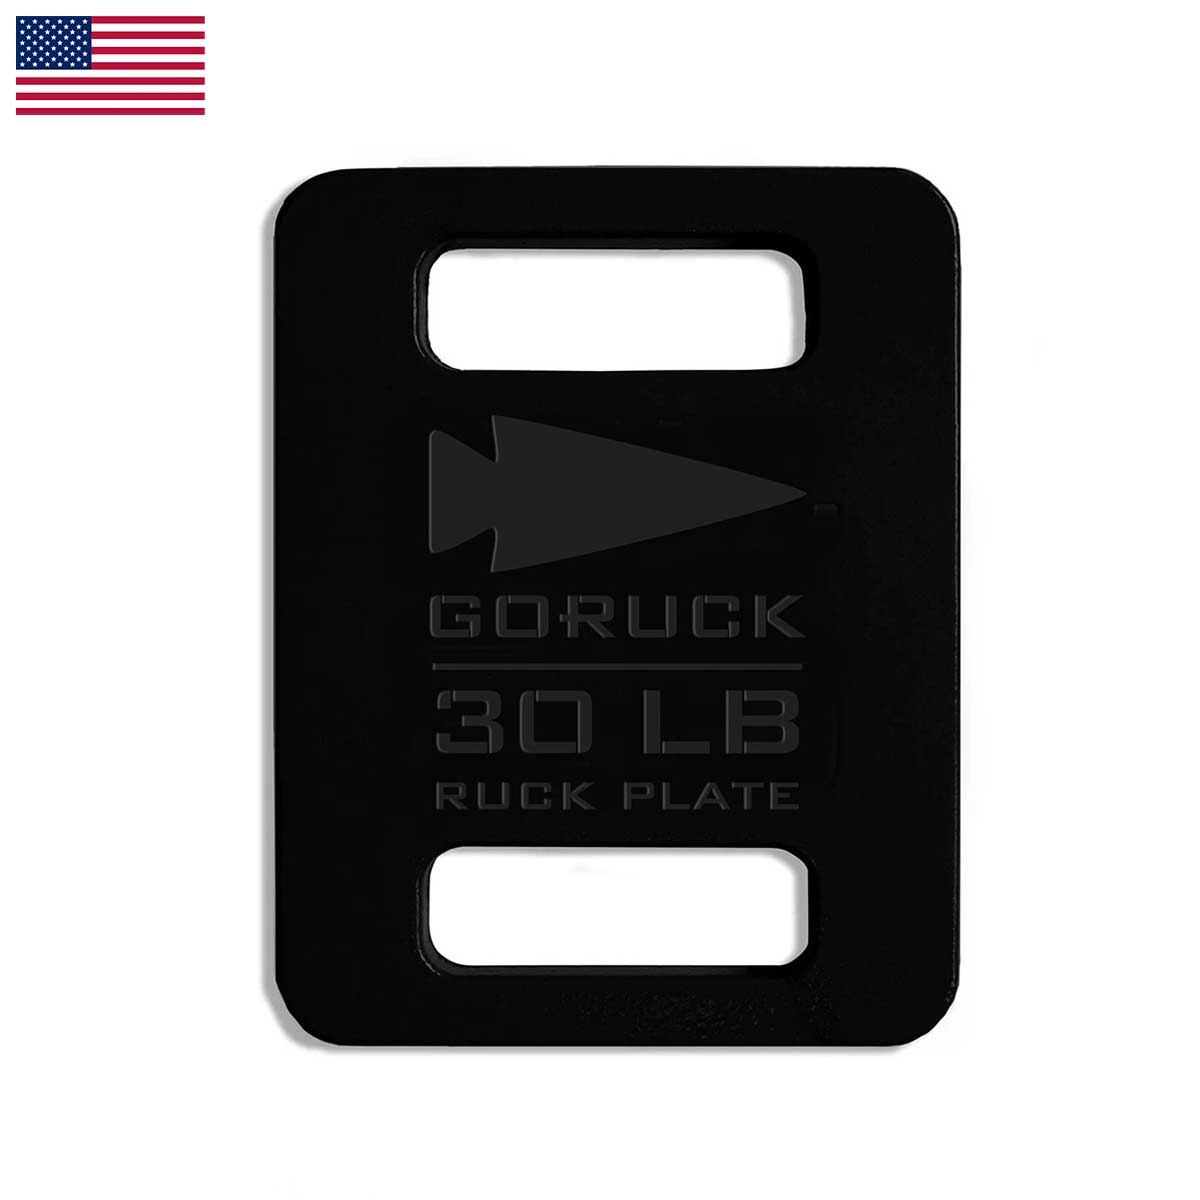 30 pound ruck plate made in usa